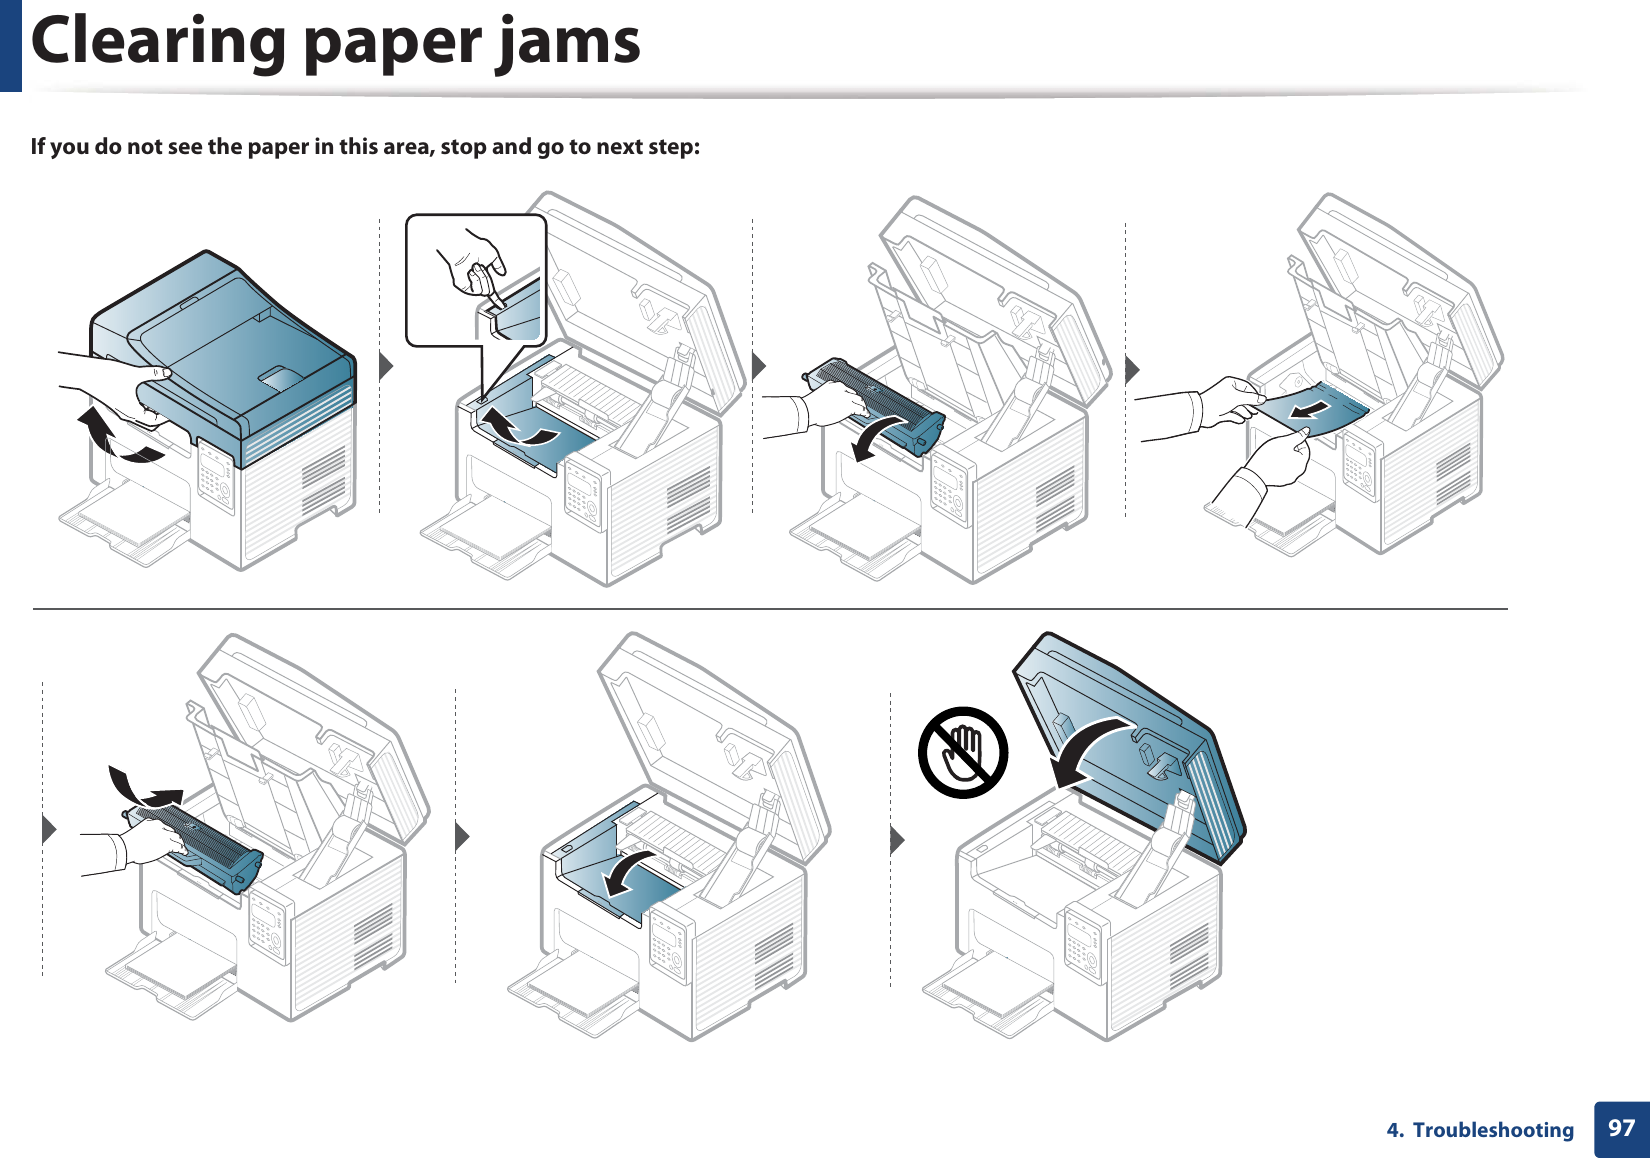 Clearing paper jams974.  TroubleshootingIf you do not see the paper in this area, stop and go to next step: